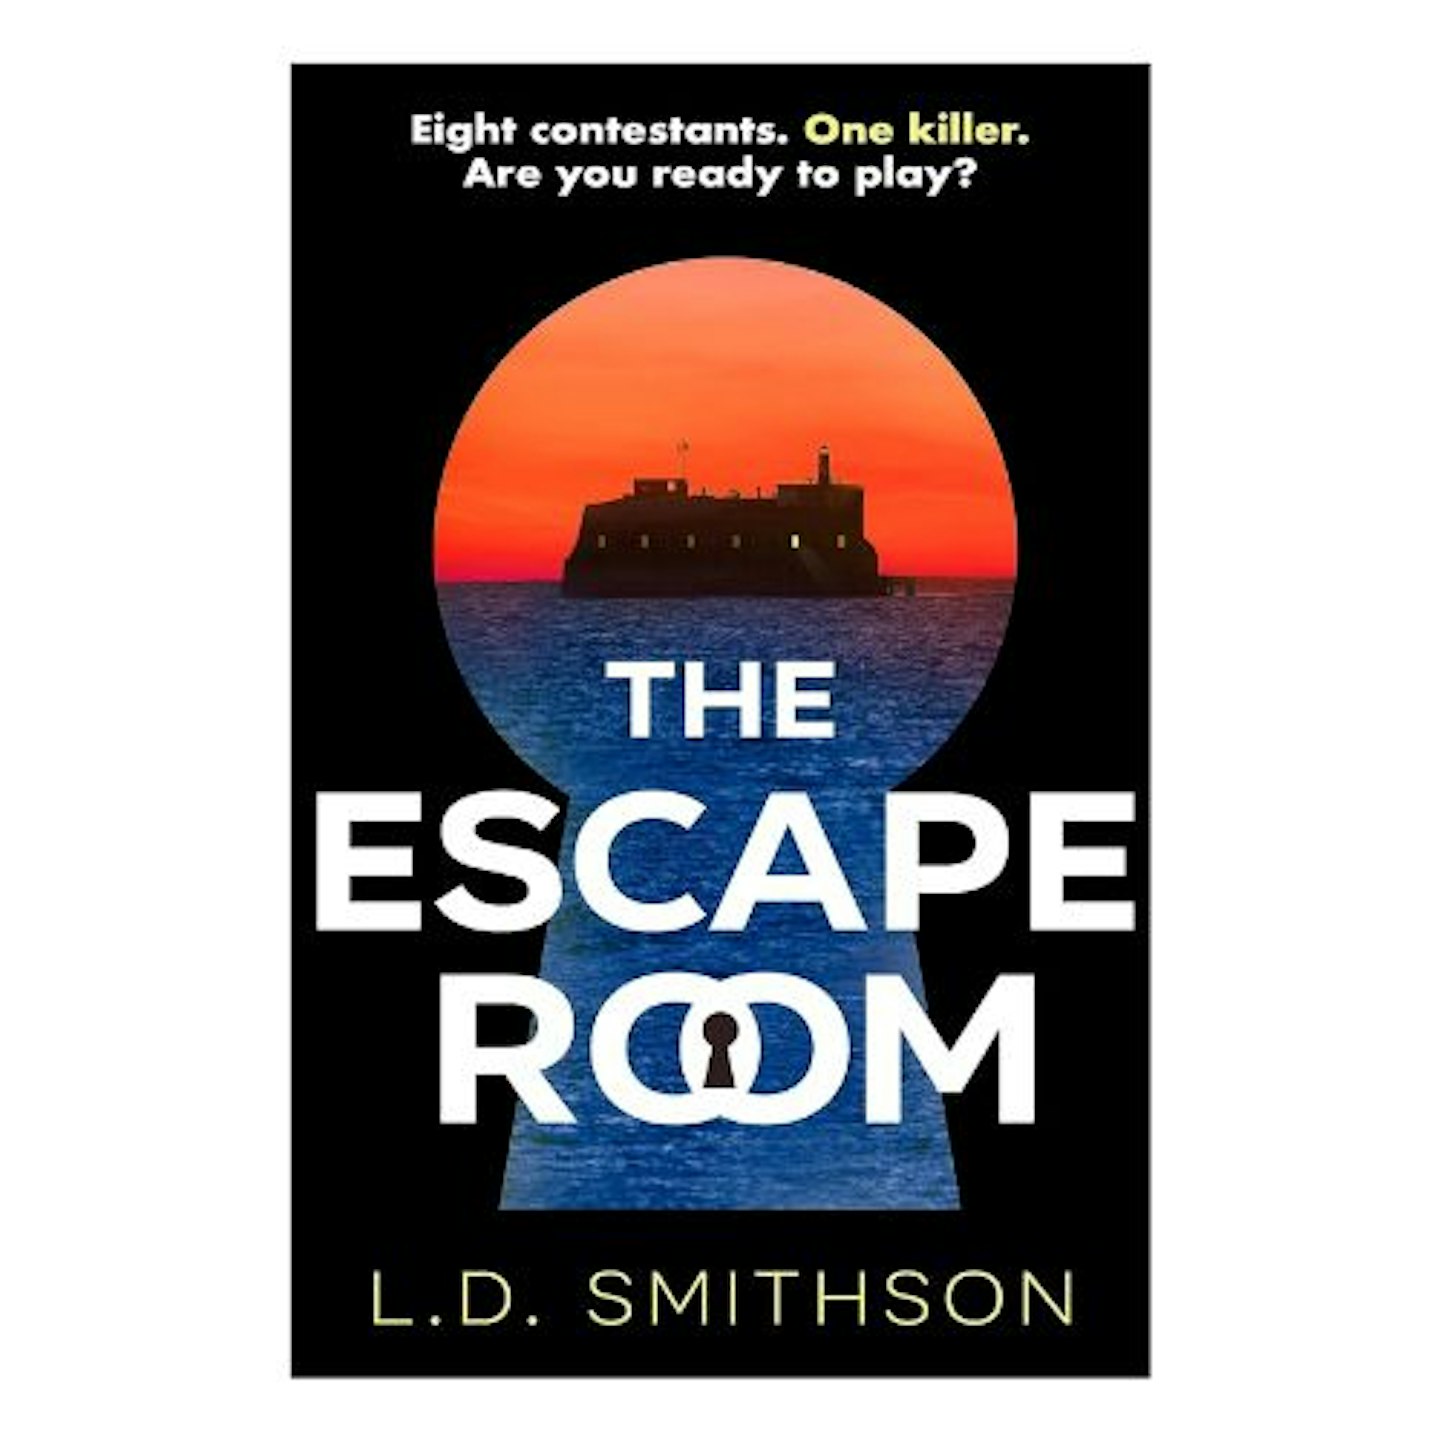 The Escape Room by L.D. Smithson